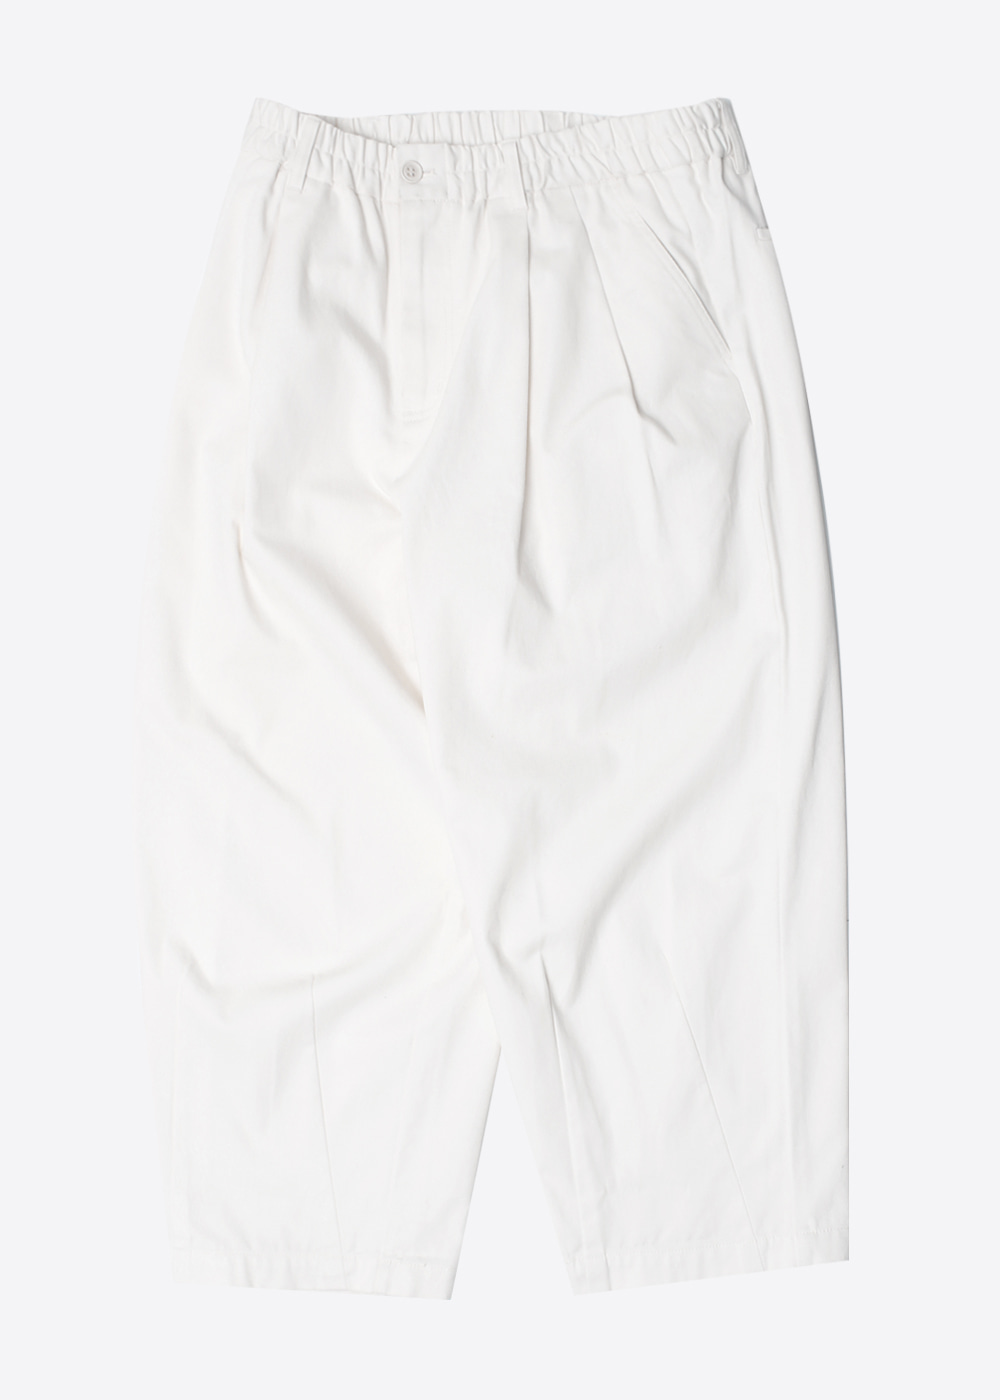 SENSE OF PLACE BY URBAN RESEARCH‘wide fit’ cotton hd pant